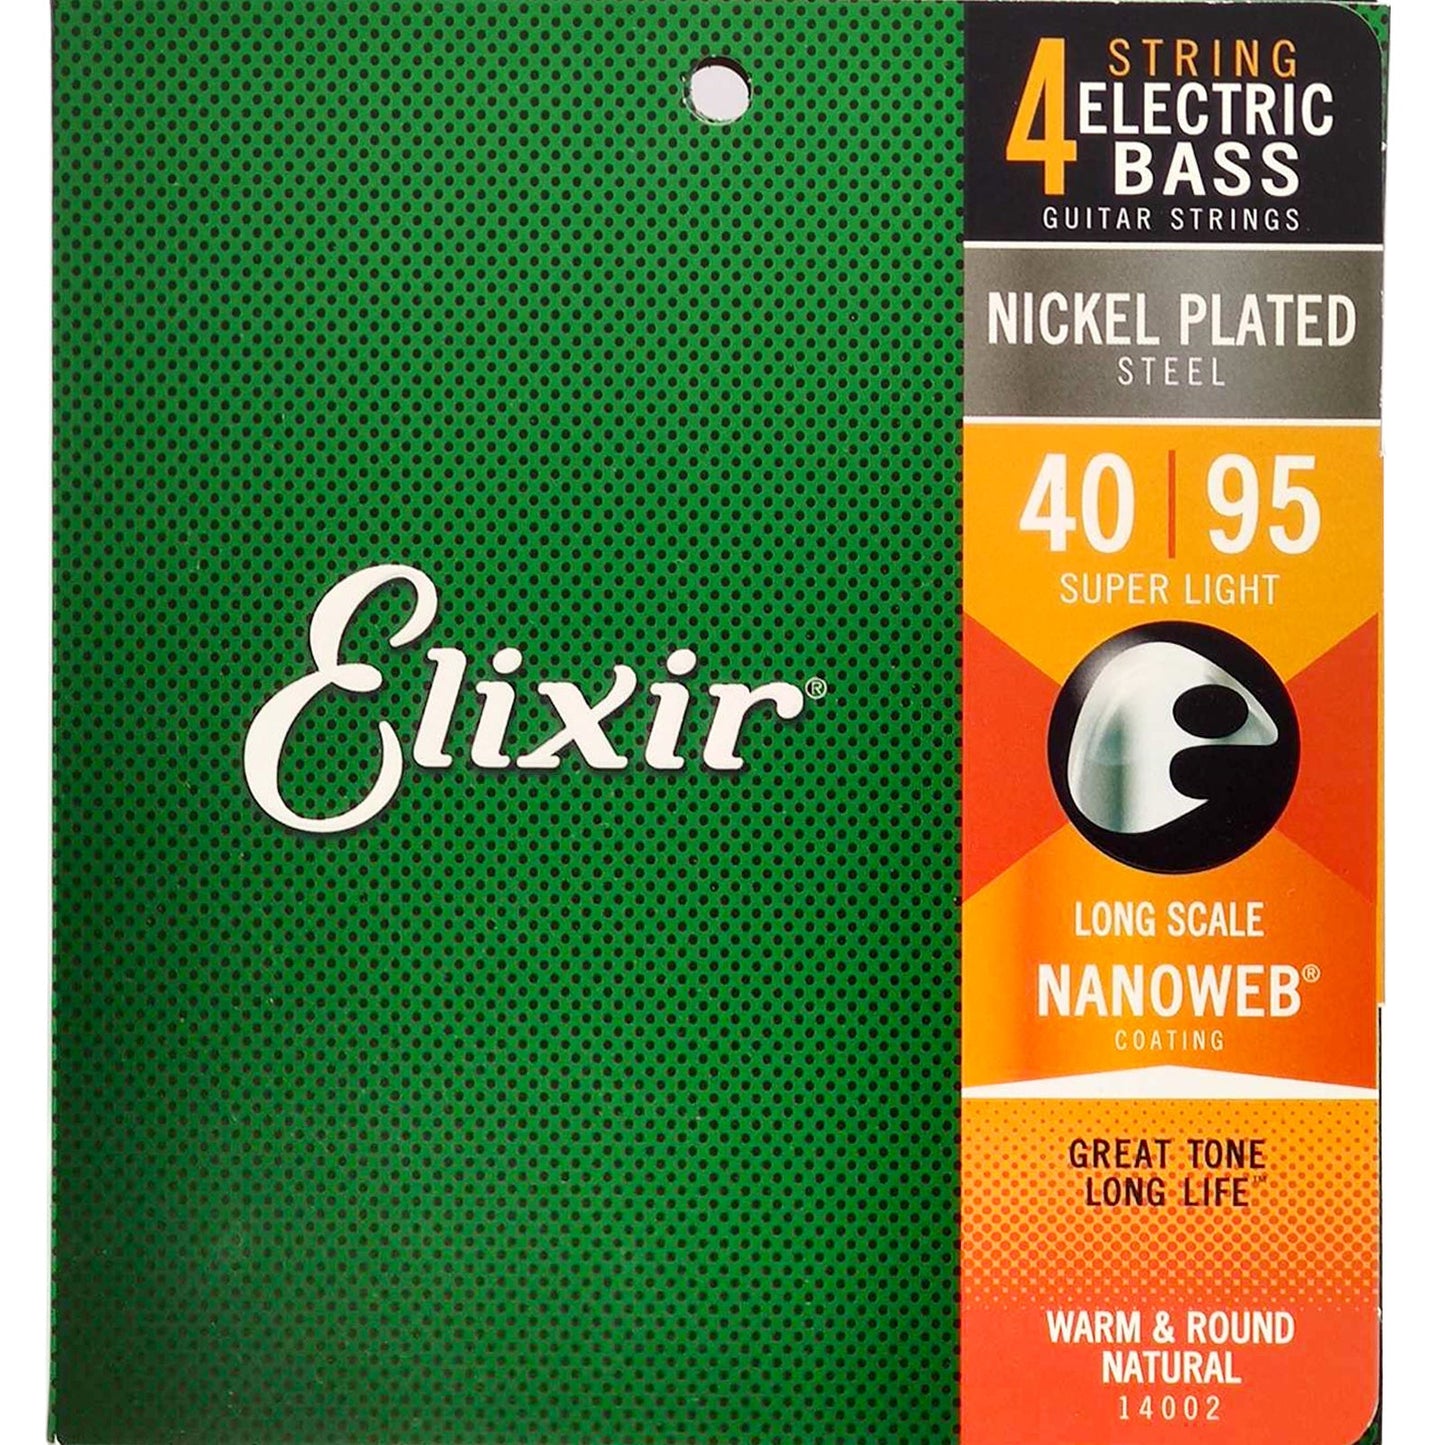 Elixir Electric Bass 4-String Nickel Plated Steel Bass Guitar Strings with NANOWEB Coating